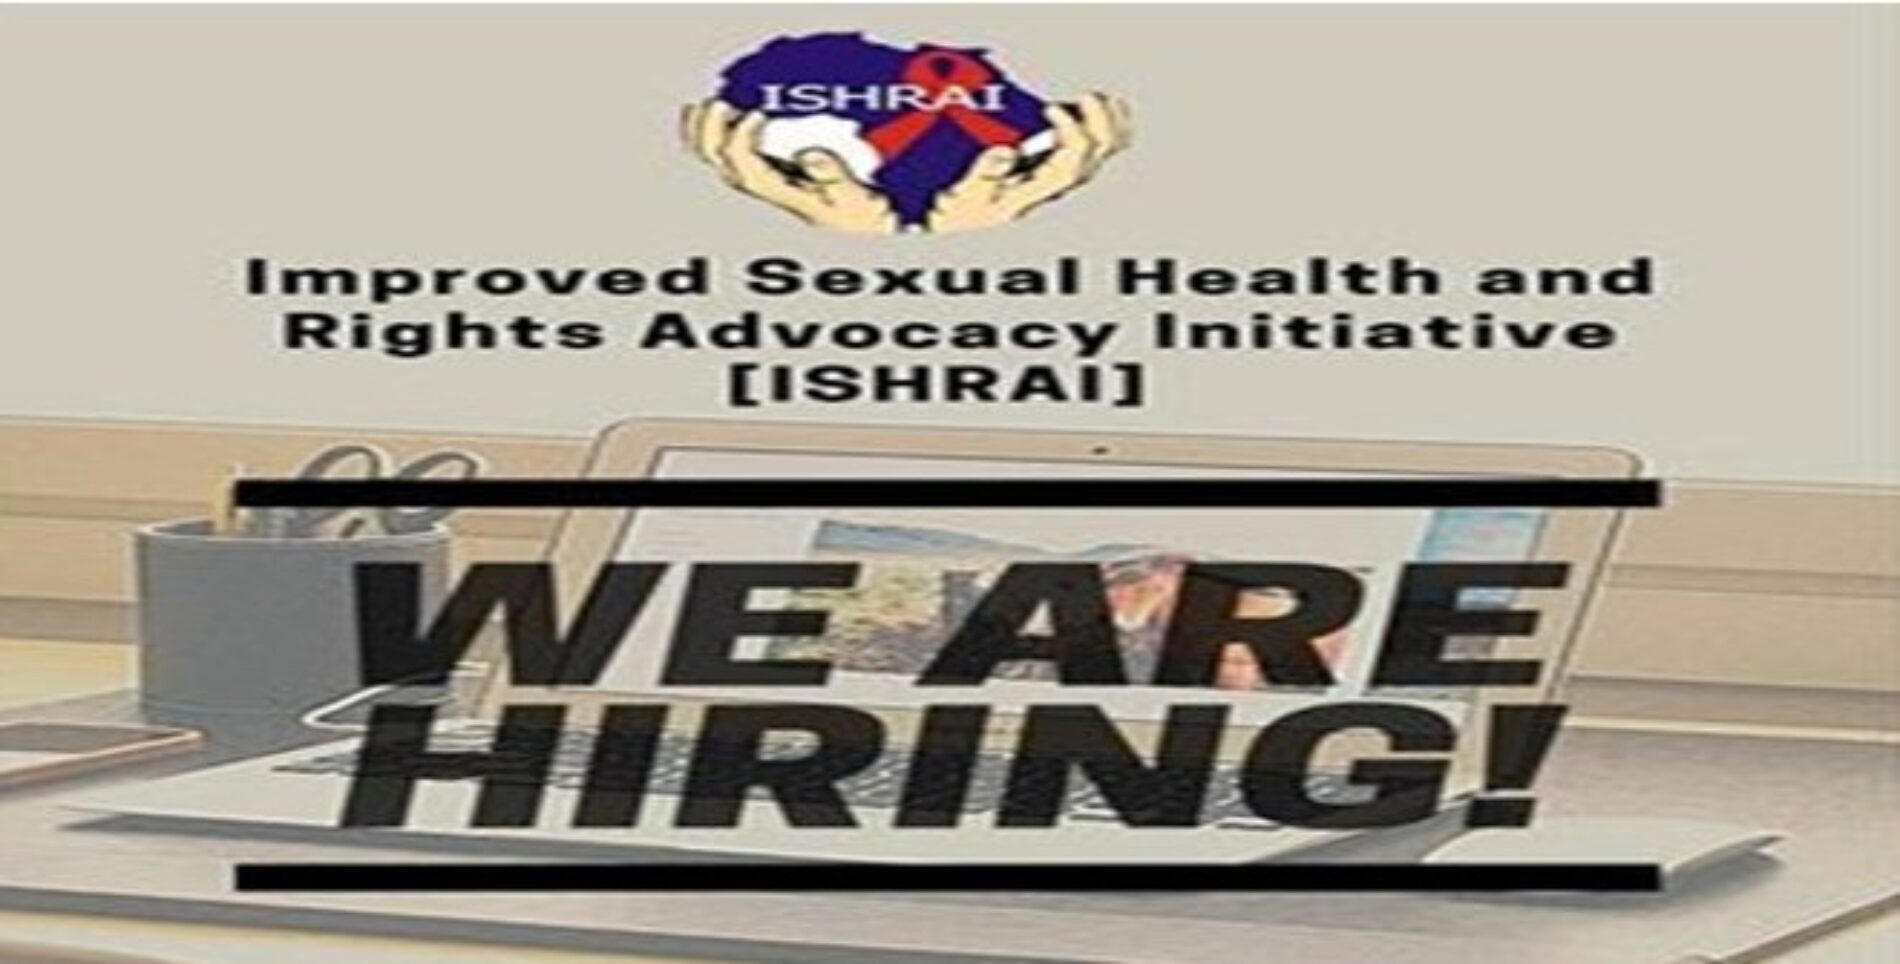 Improved Sexual Health and Rights Advocacy Initiative (ISHRAI) Is Employing